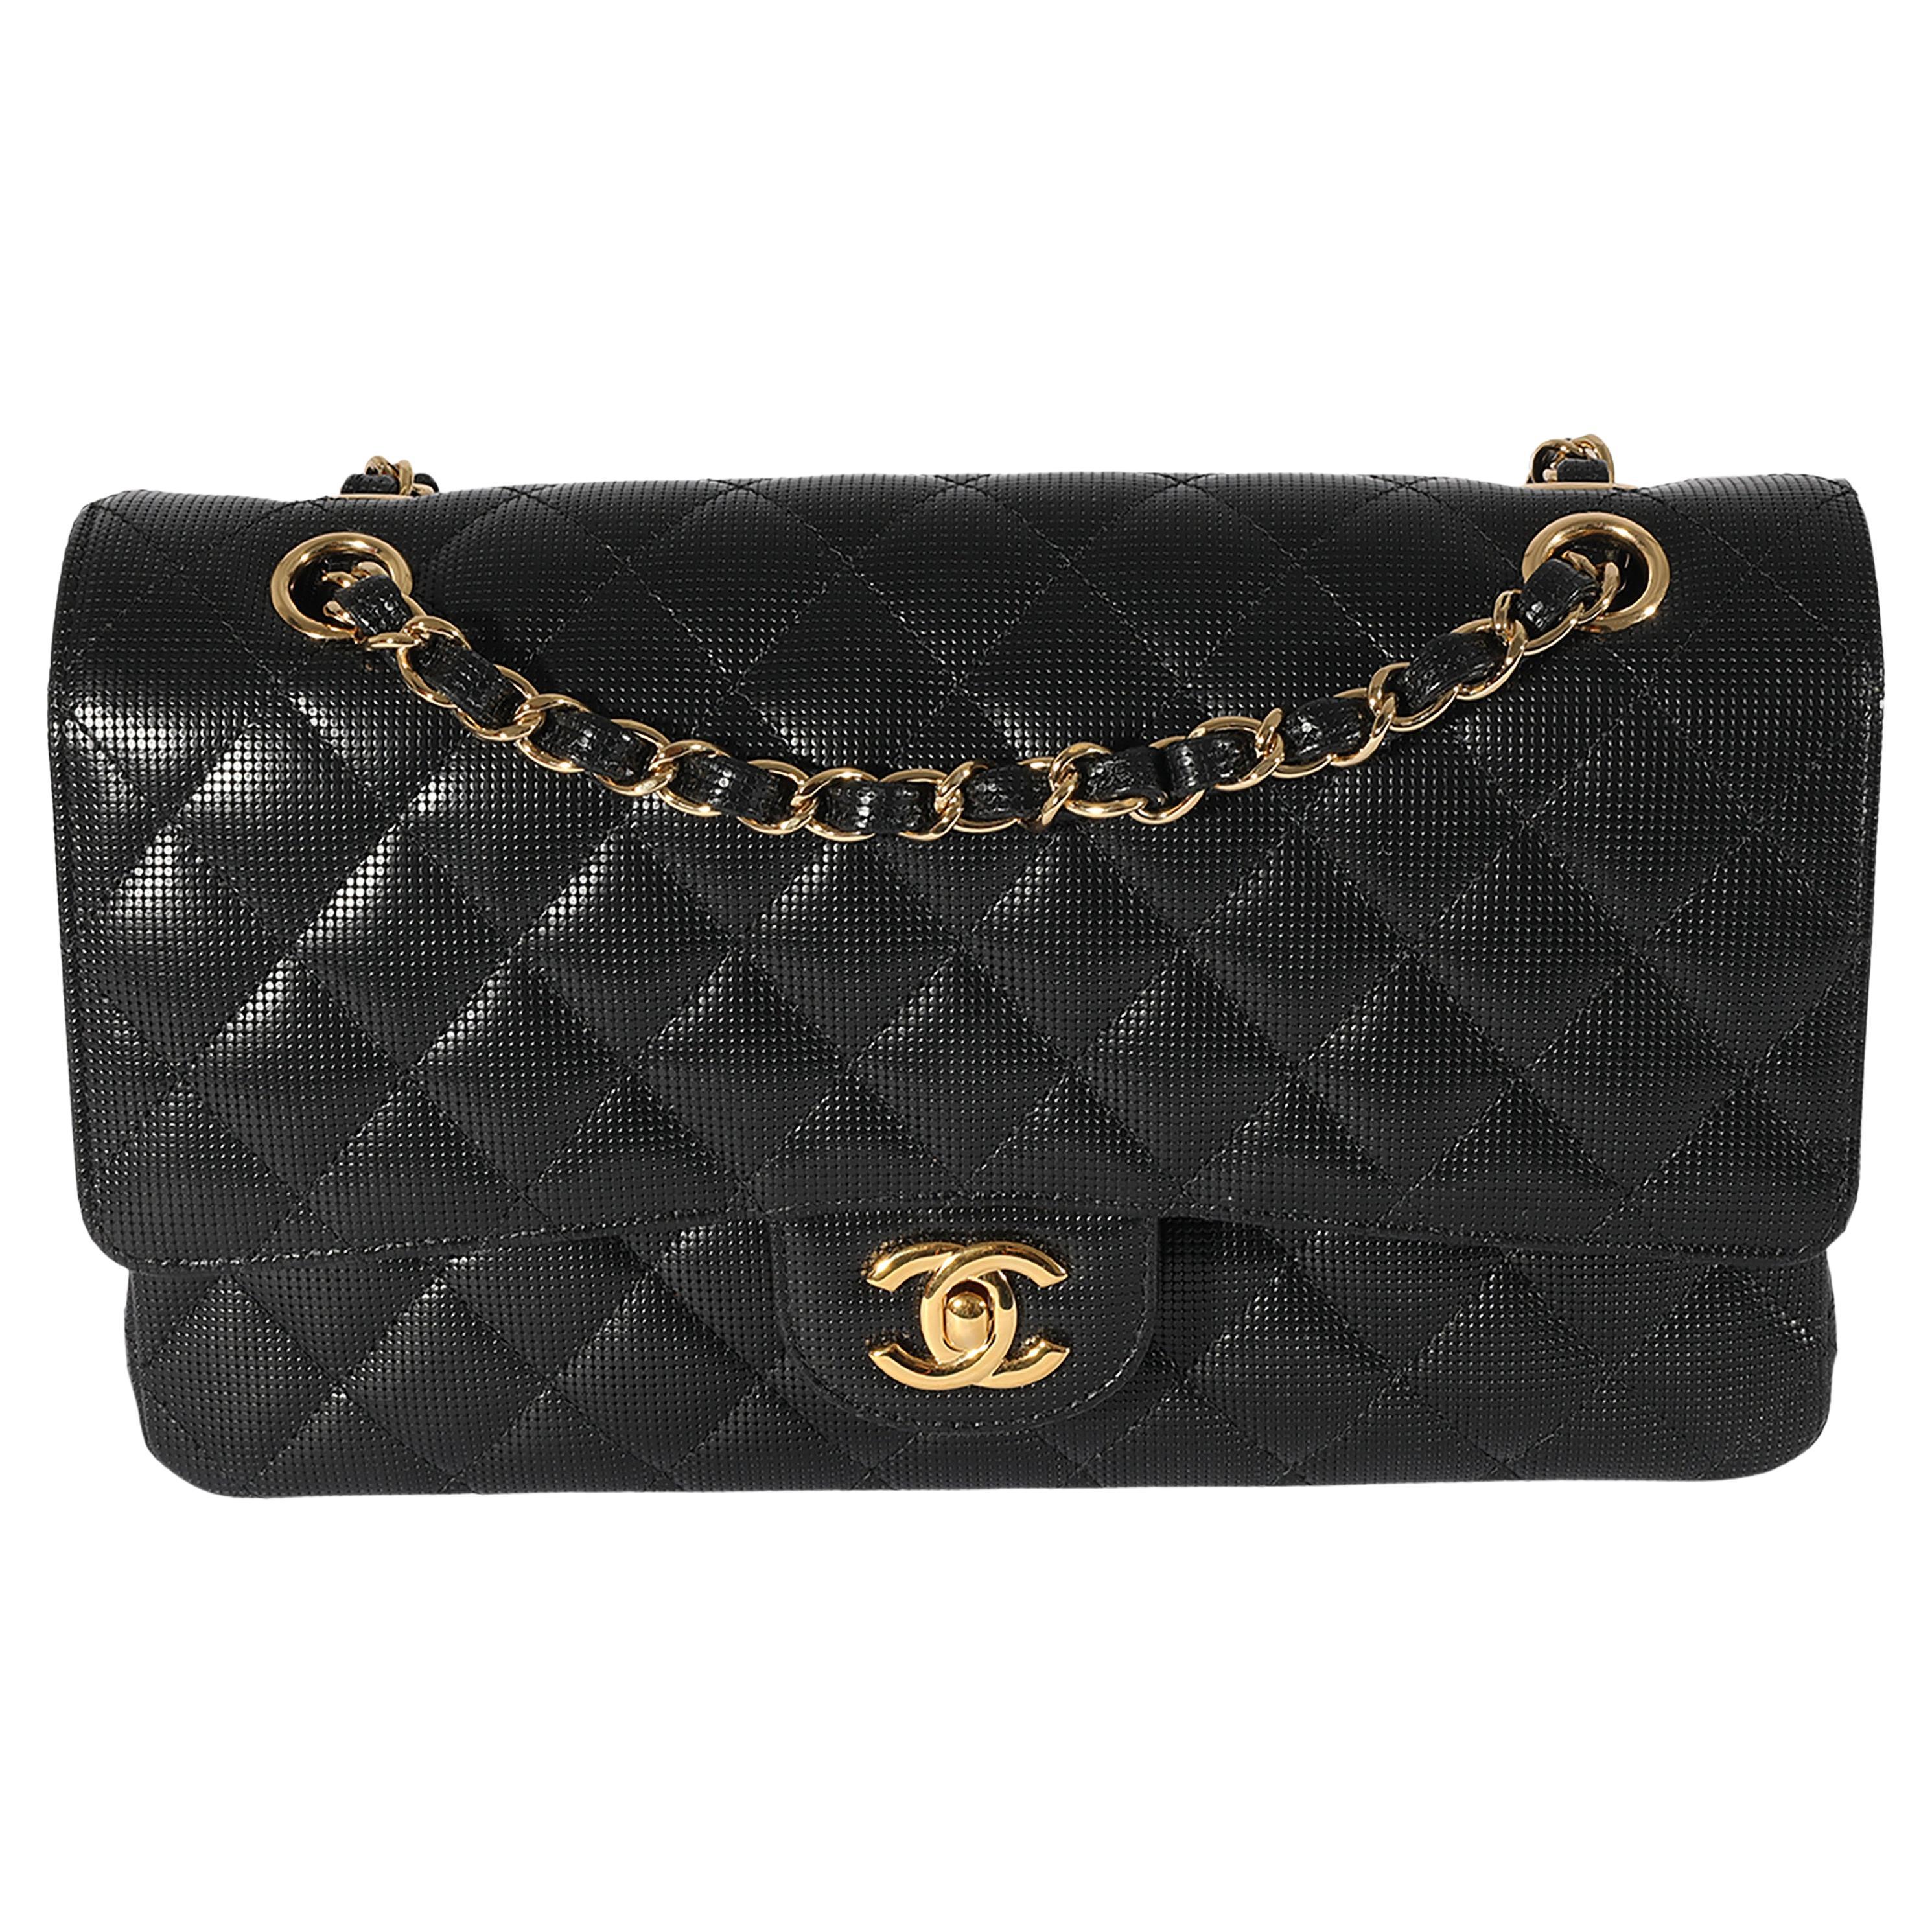 Chanel Black Quilted Perforated Lambskin Medium Classic Double Flap Bag im Angebot